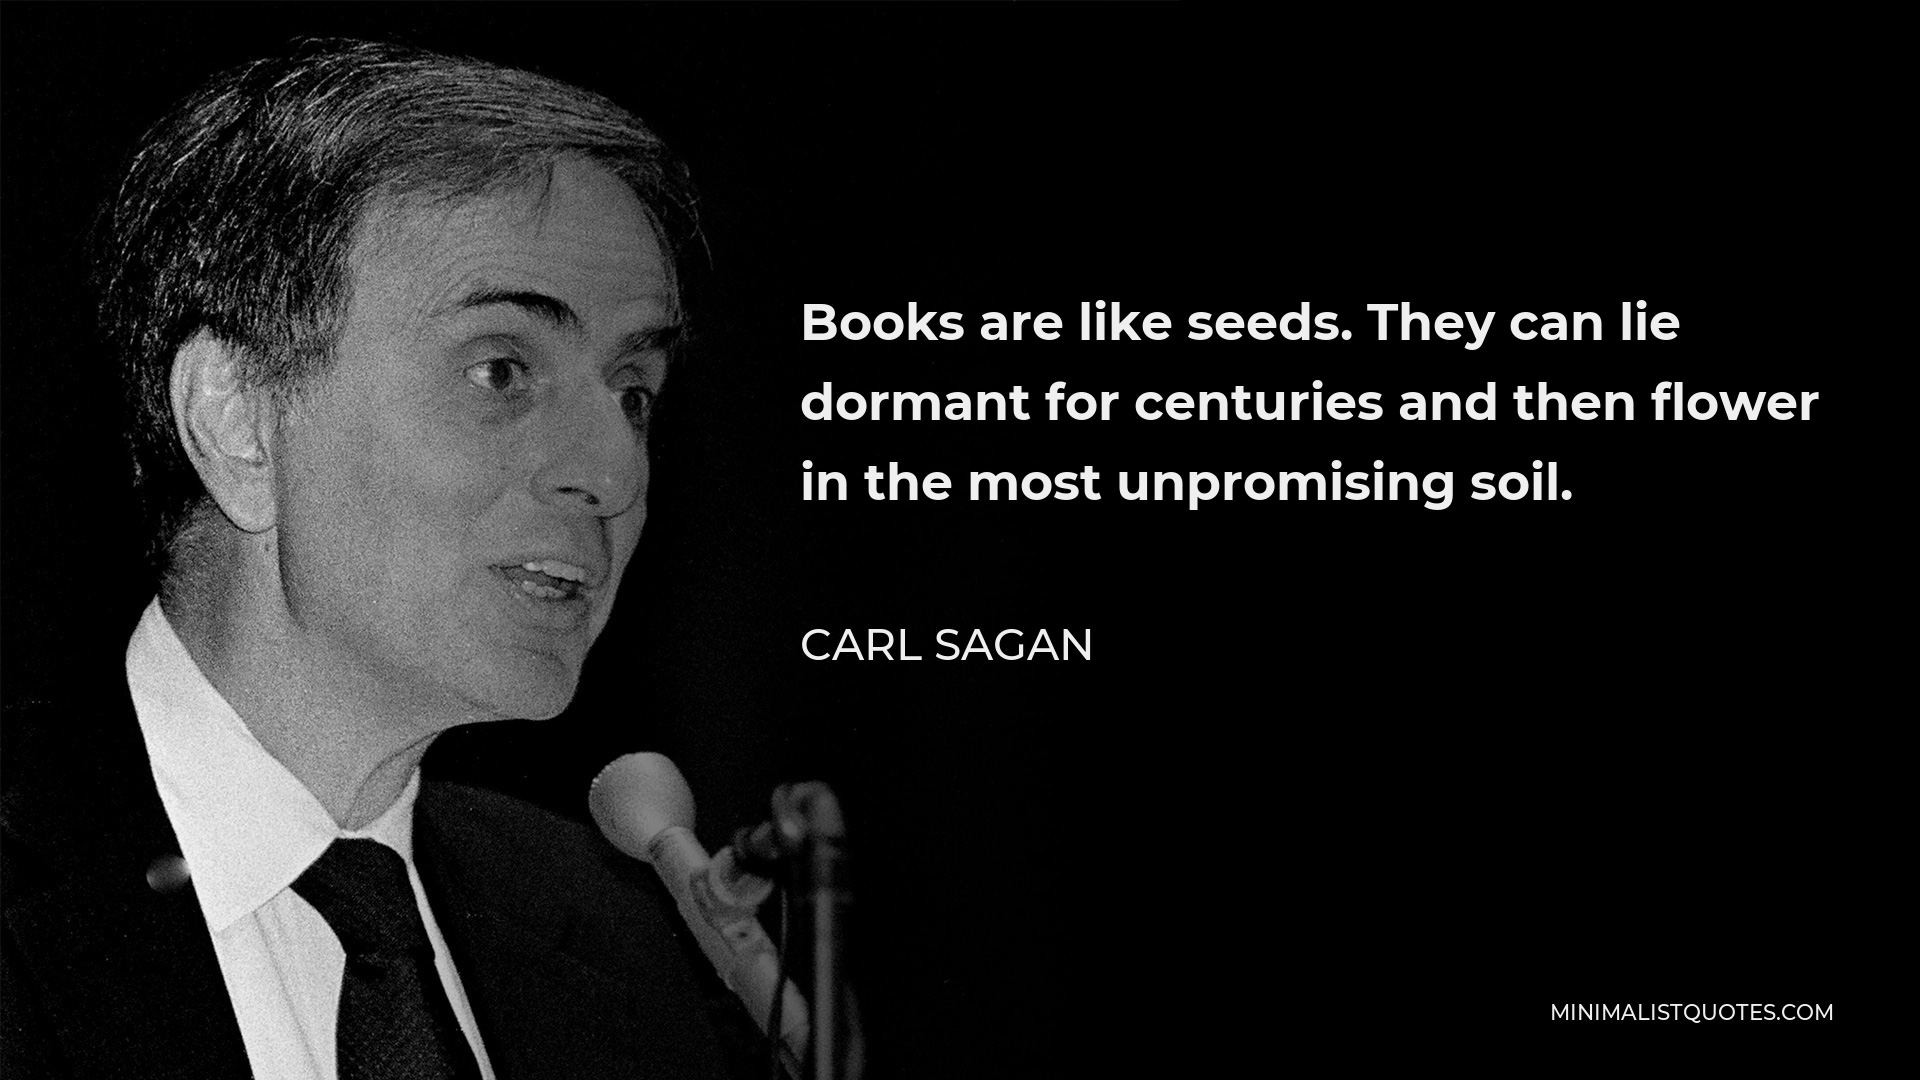 Carl Sagan Quote - Books are like seeds. They can lie dormant for centuries and then flower in the most unpromising soil.